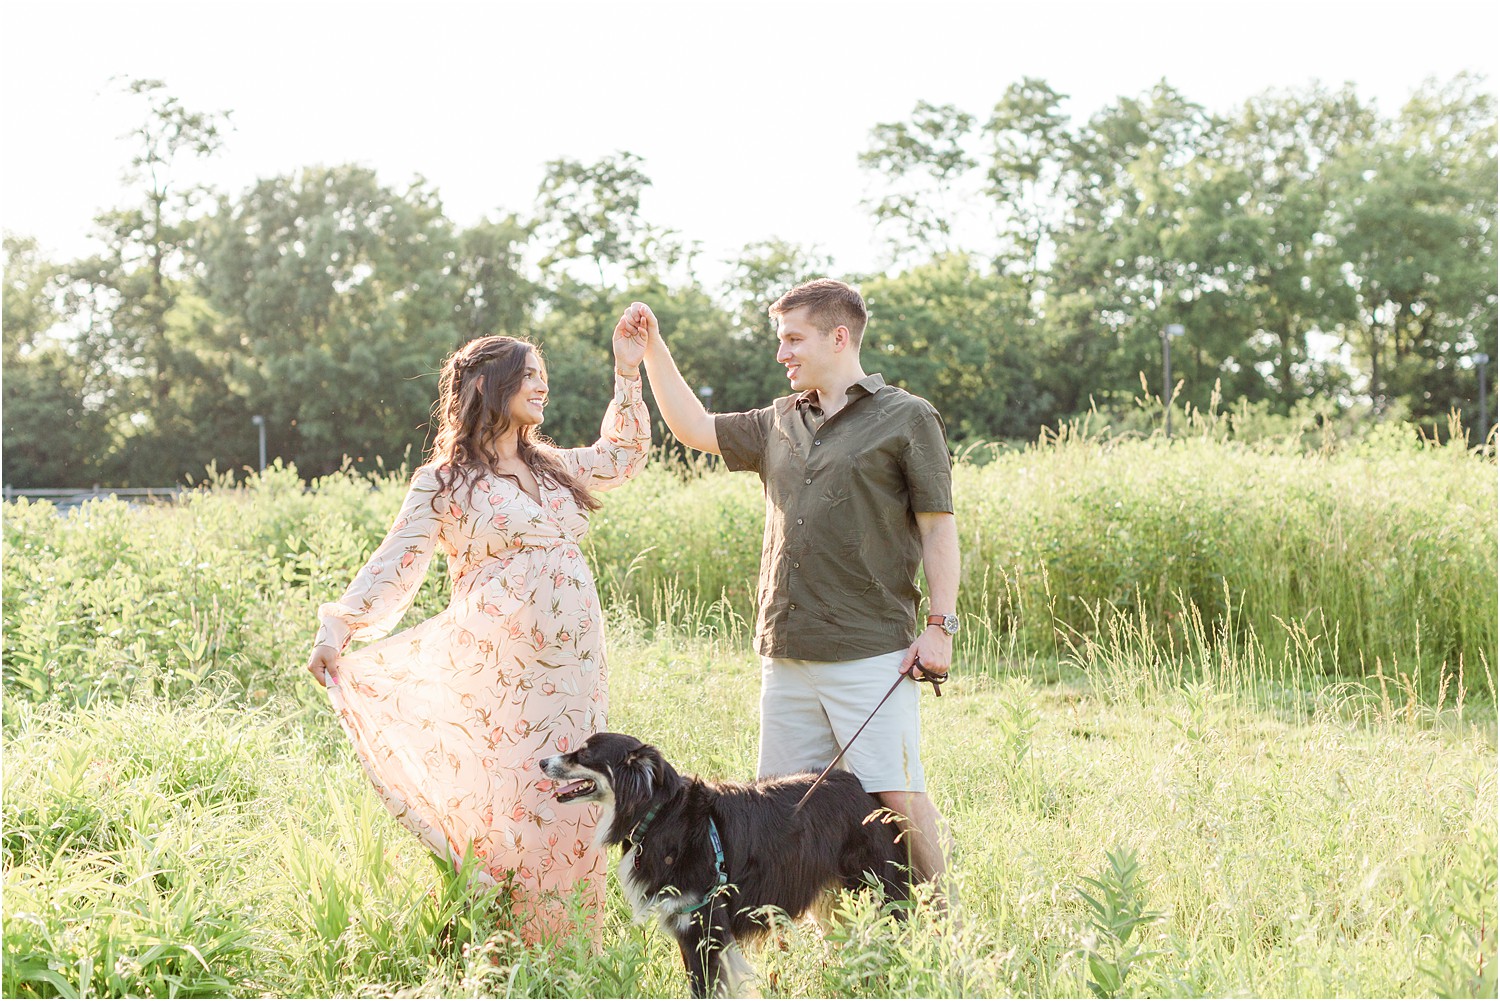 husband and wife twirl in grass with their dog during Bartram’s Garden maternity session by Jocelyn cruz photography